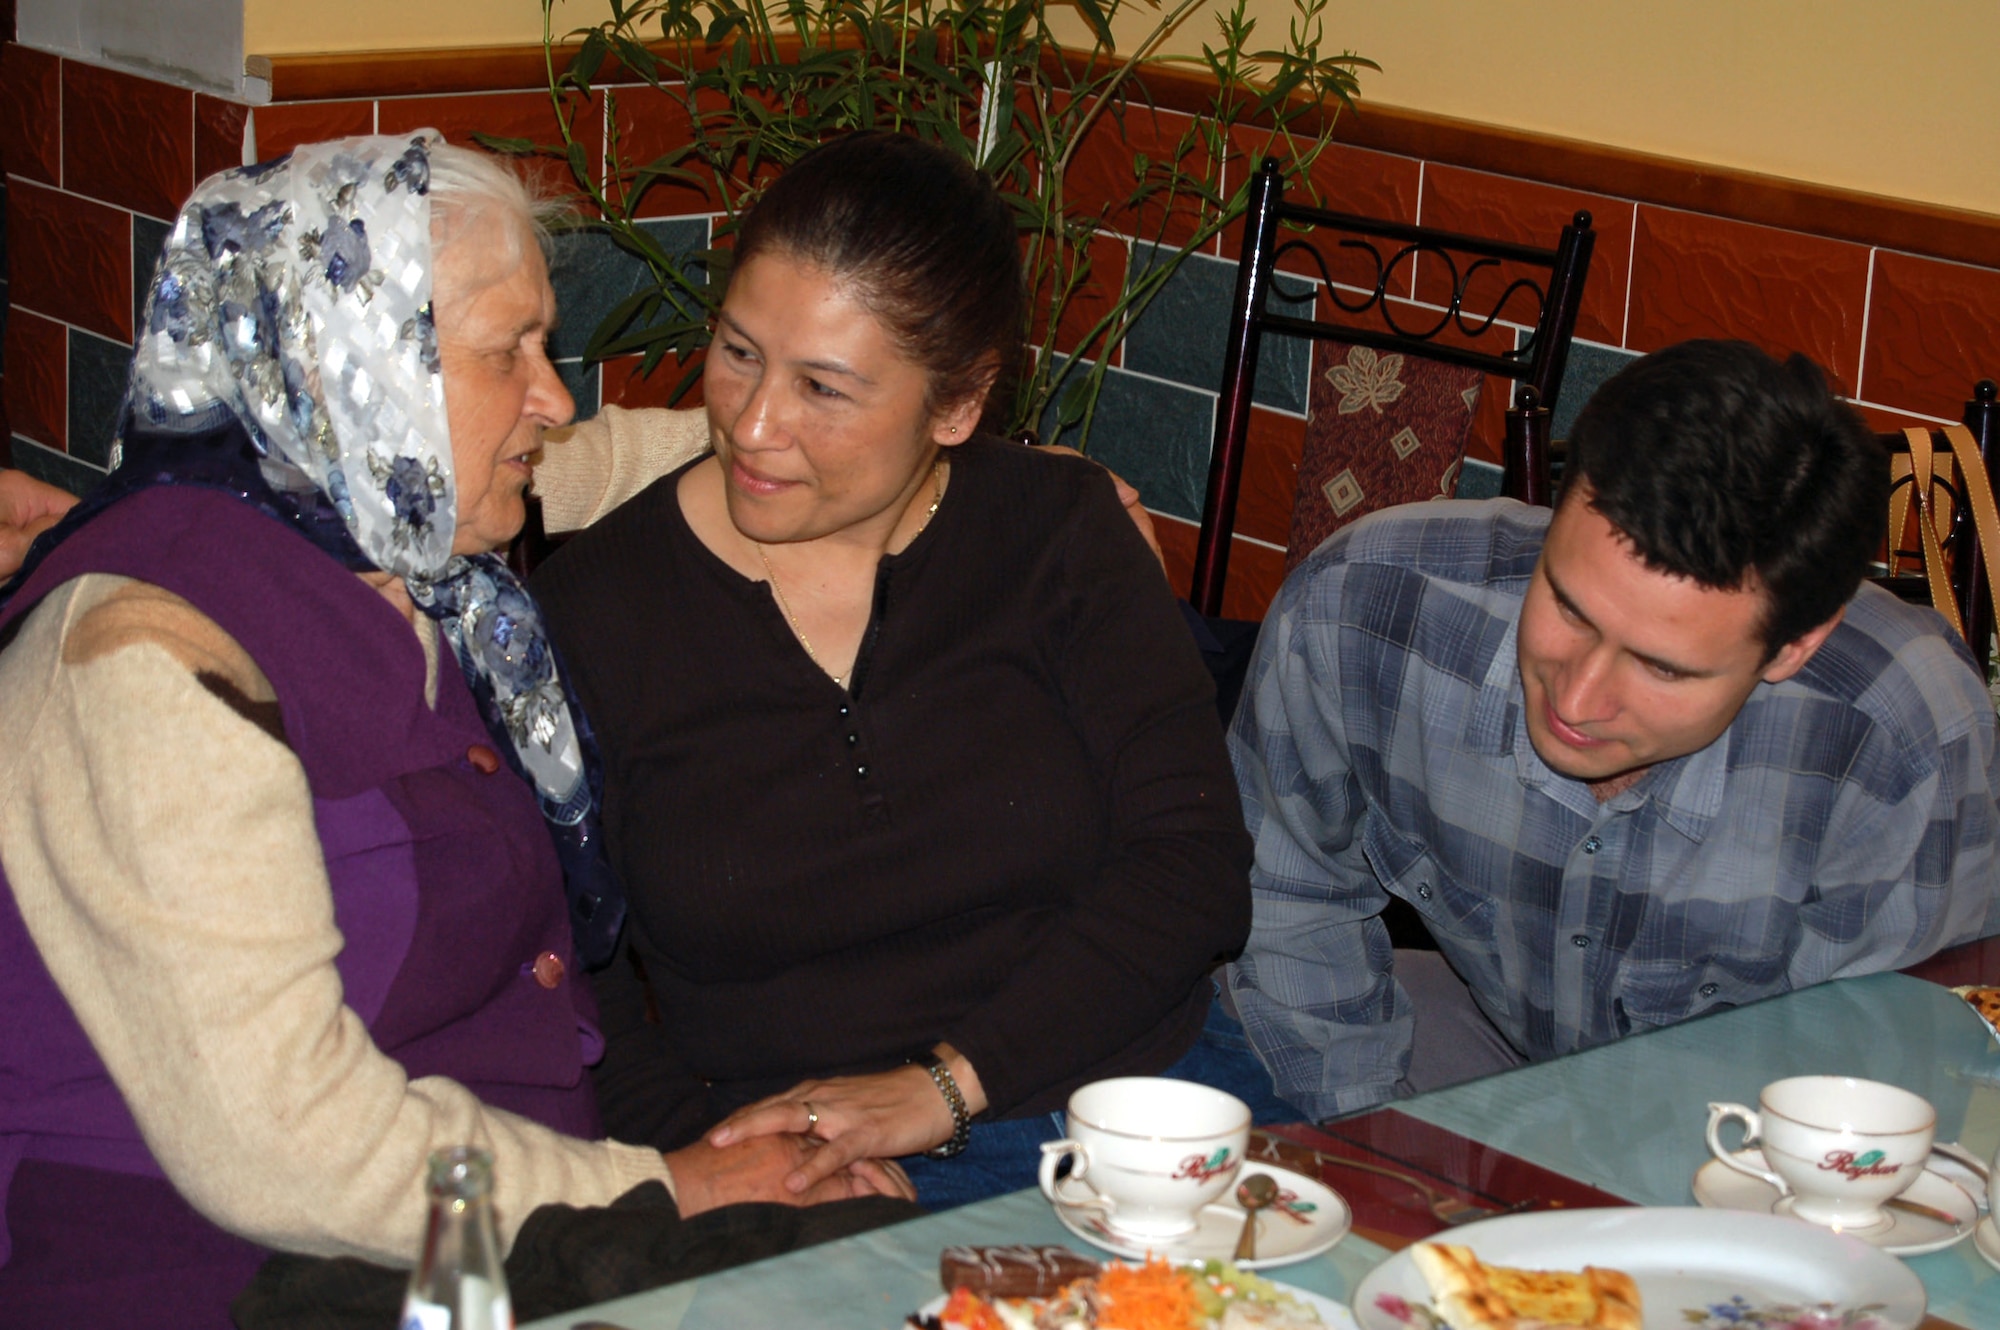 Olga sings a lullaby to Tech. Sgt. Victoria Querido during a lunch outing in Bishkek, Kyrgyzstan on Thursday, May 4, 2006. Sergeant Querido and Airmen from nearby Manas Air Base sponsor 20 elderly women who receive aid from Babushka Adoption. The local non-governmental organization assists elderly people left vulnerable as this post-Soviet nation works to stabilize its economy. Sergeant Querido is deployed from Fairchild Air Force Base, Wash. (U.S. Air Force photo/Staff Sgt. Lara Gale)